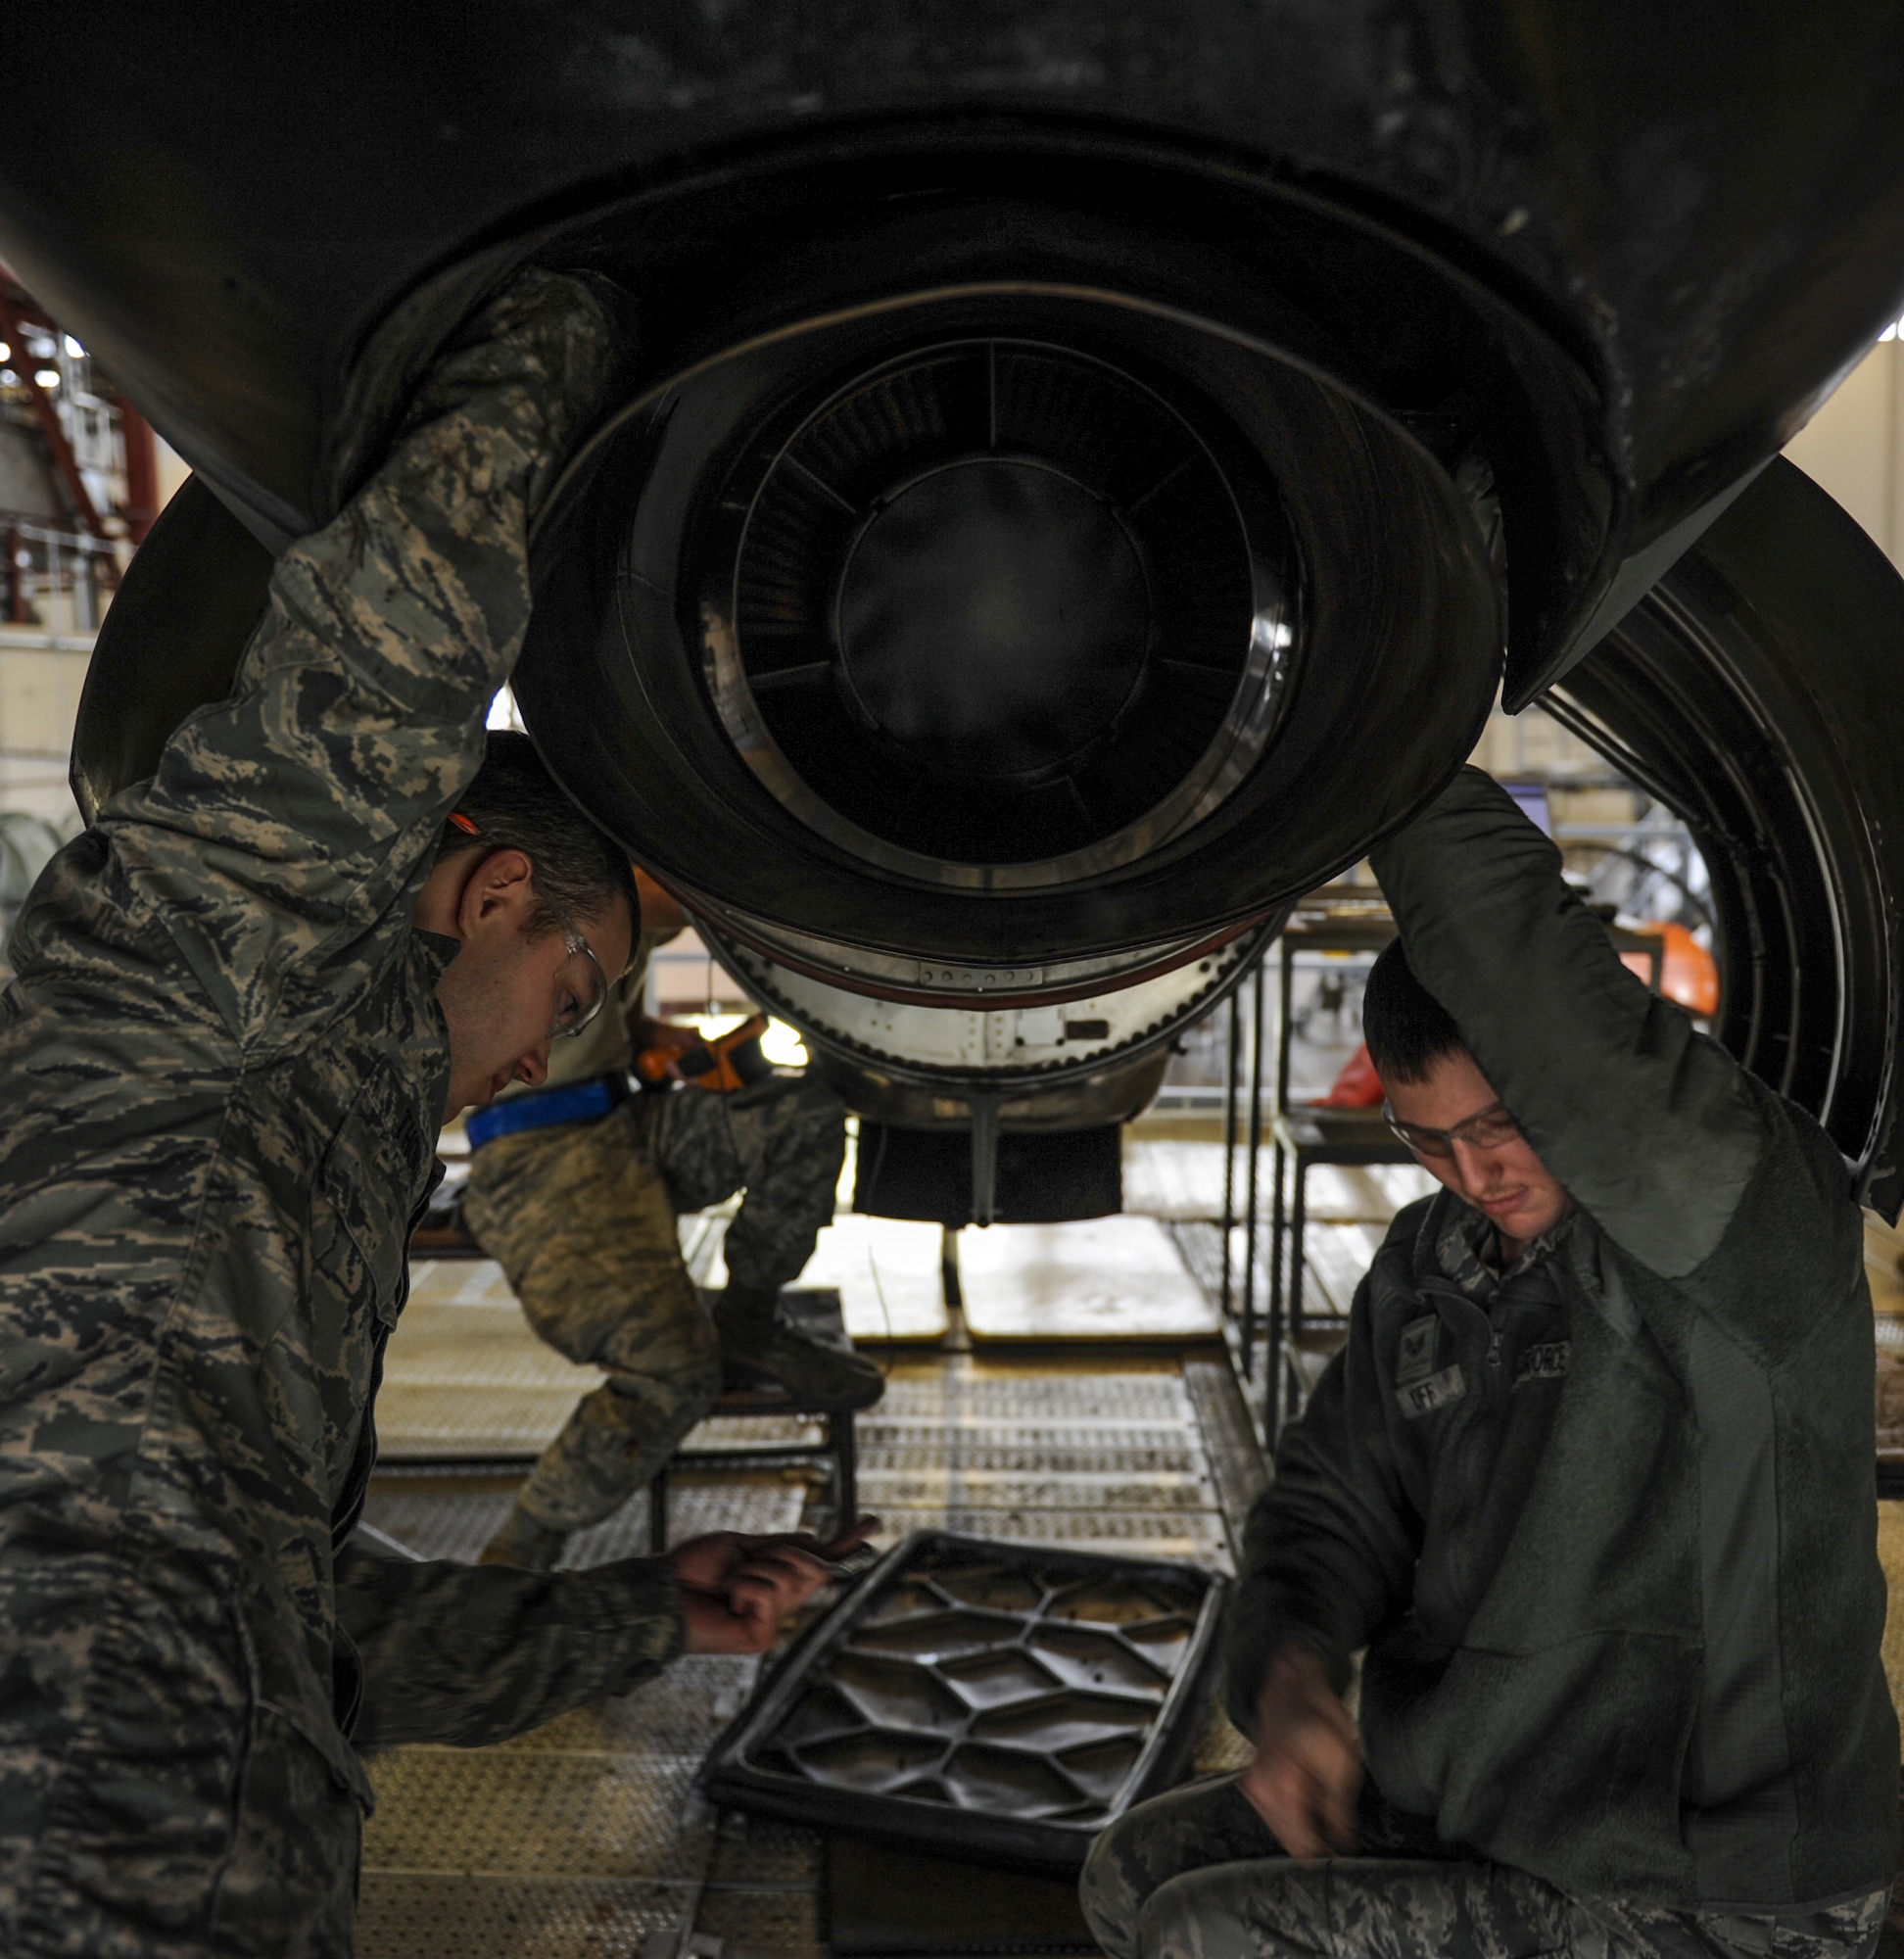 U.S. Air Force Airman 1st Class Hayden Thomas, 19th MXS aerospace propulsion apprentice, left, and Senior Airman Cory Poff, 19th Maintenance Squadron aerospace propulsion journeyman replace a turbine exhaust casing on a C-130J engine Dec. 29, 2015, at Little Rock Air Force Base, Ark. Maintainers from the 19th MXS work on isochronal platforms with electric power, compressed air and lights that allow a large number of people to work on a C-130 at once. (U.S Air Force photo/Senior Airman Harry Brexel)